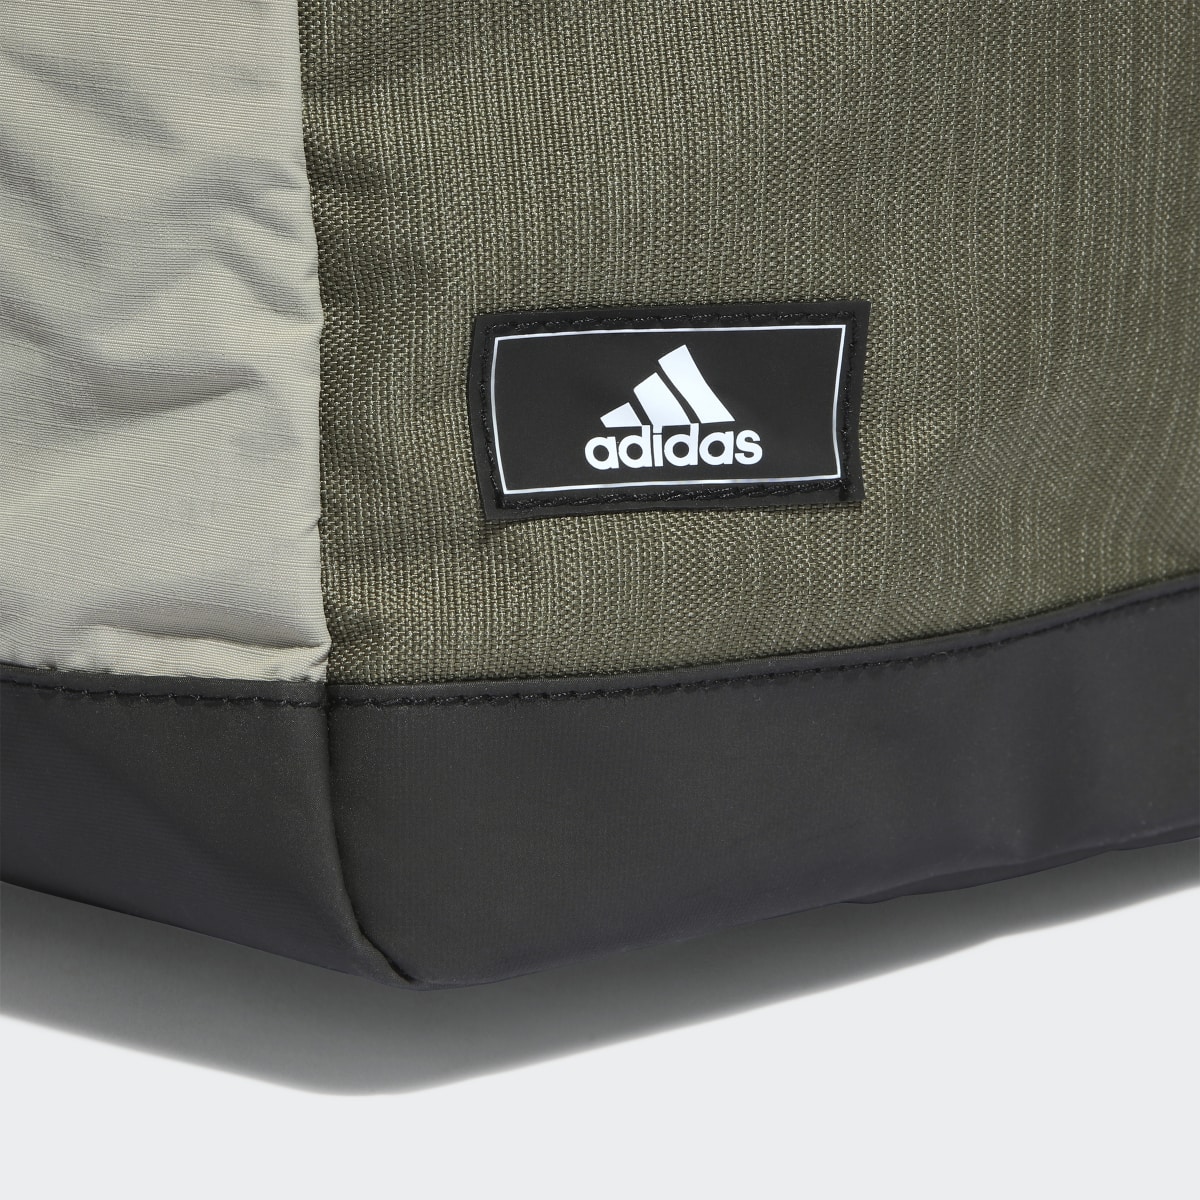 Adidas Motion Material Backpack. 7